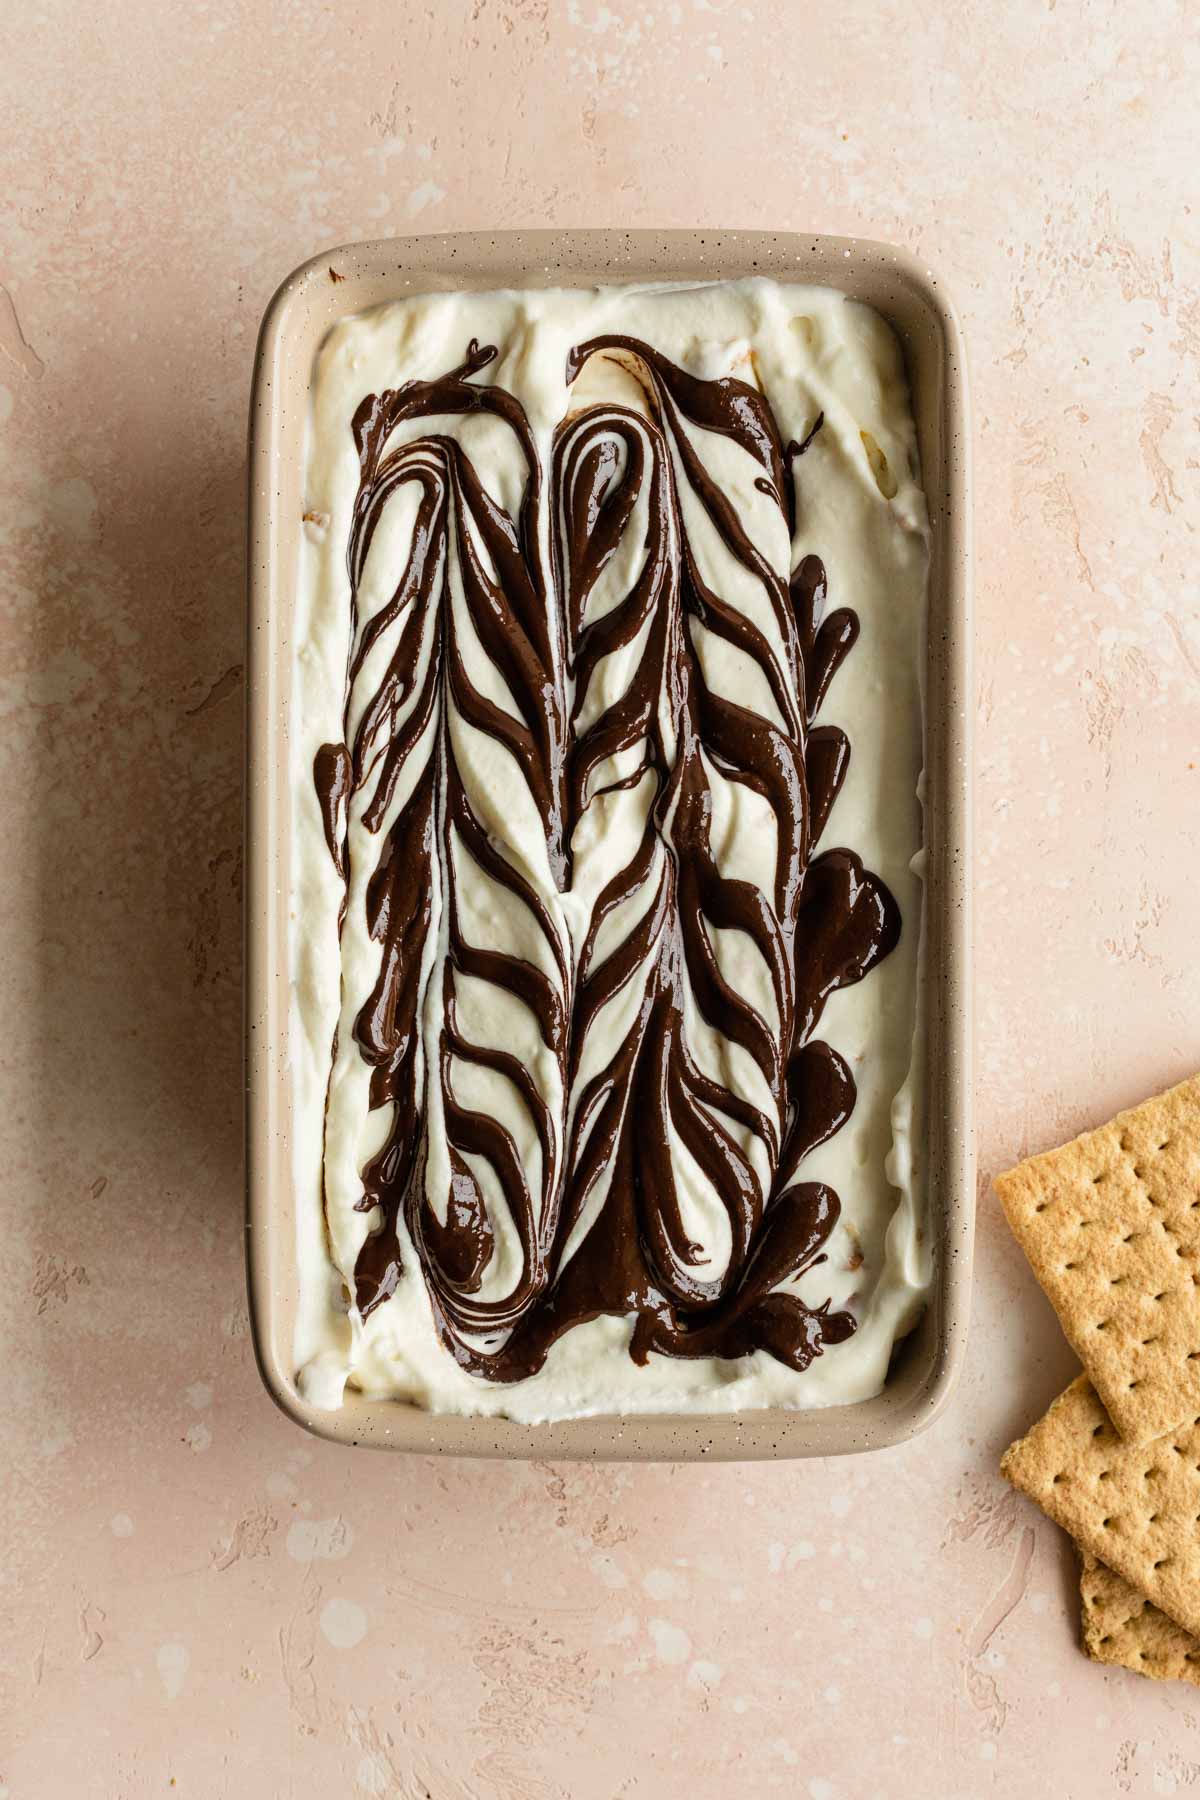 Ice cream mixture in a loaf pan with melted chocolate swirled around on the top.